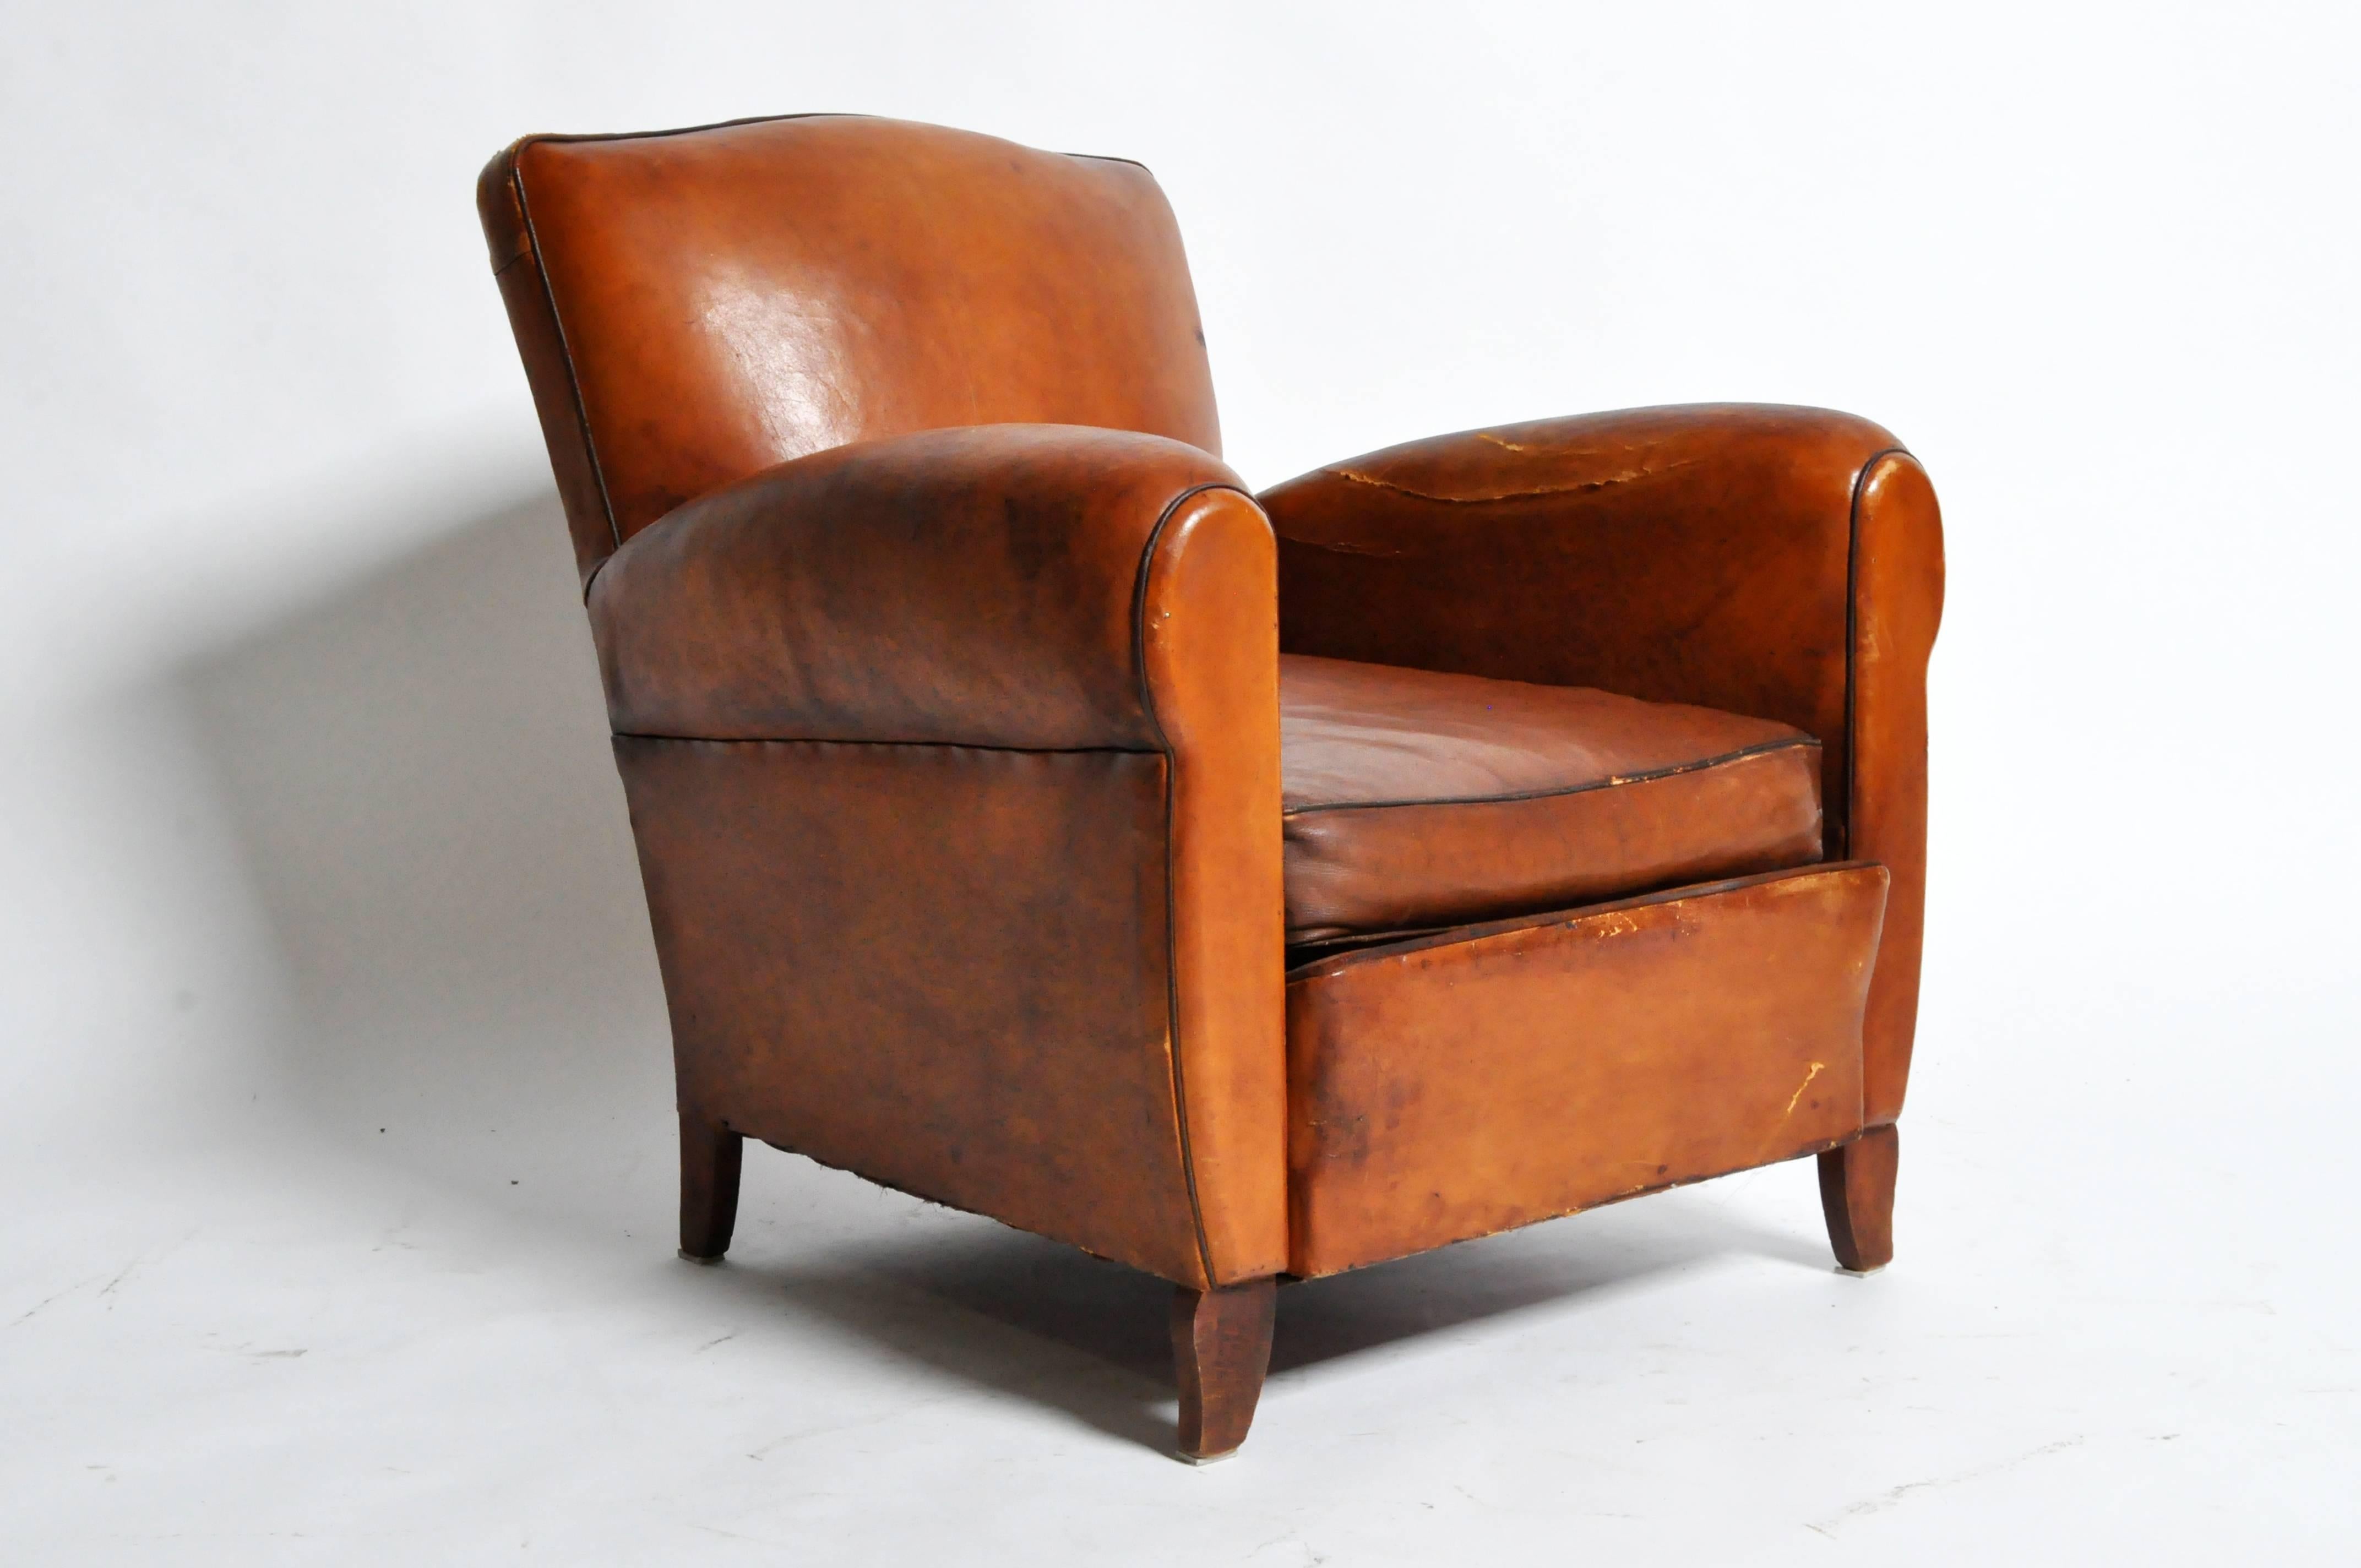 This handsome Art Deco leather chair is from Paris, France and was made from leather, c. 1940. The chair features its original leather, piping, and a beautifully aged patina. 

Additional dimensions: 20